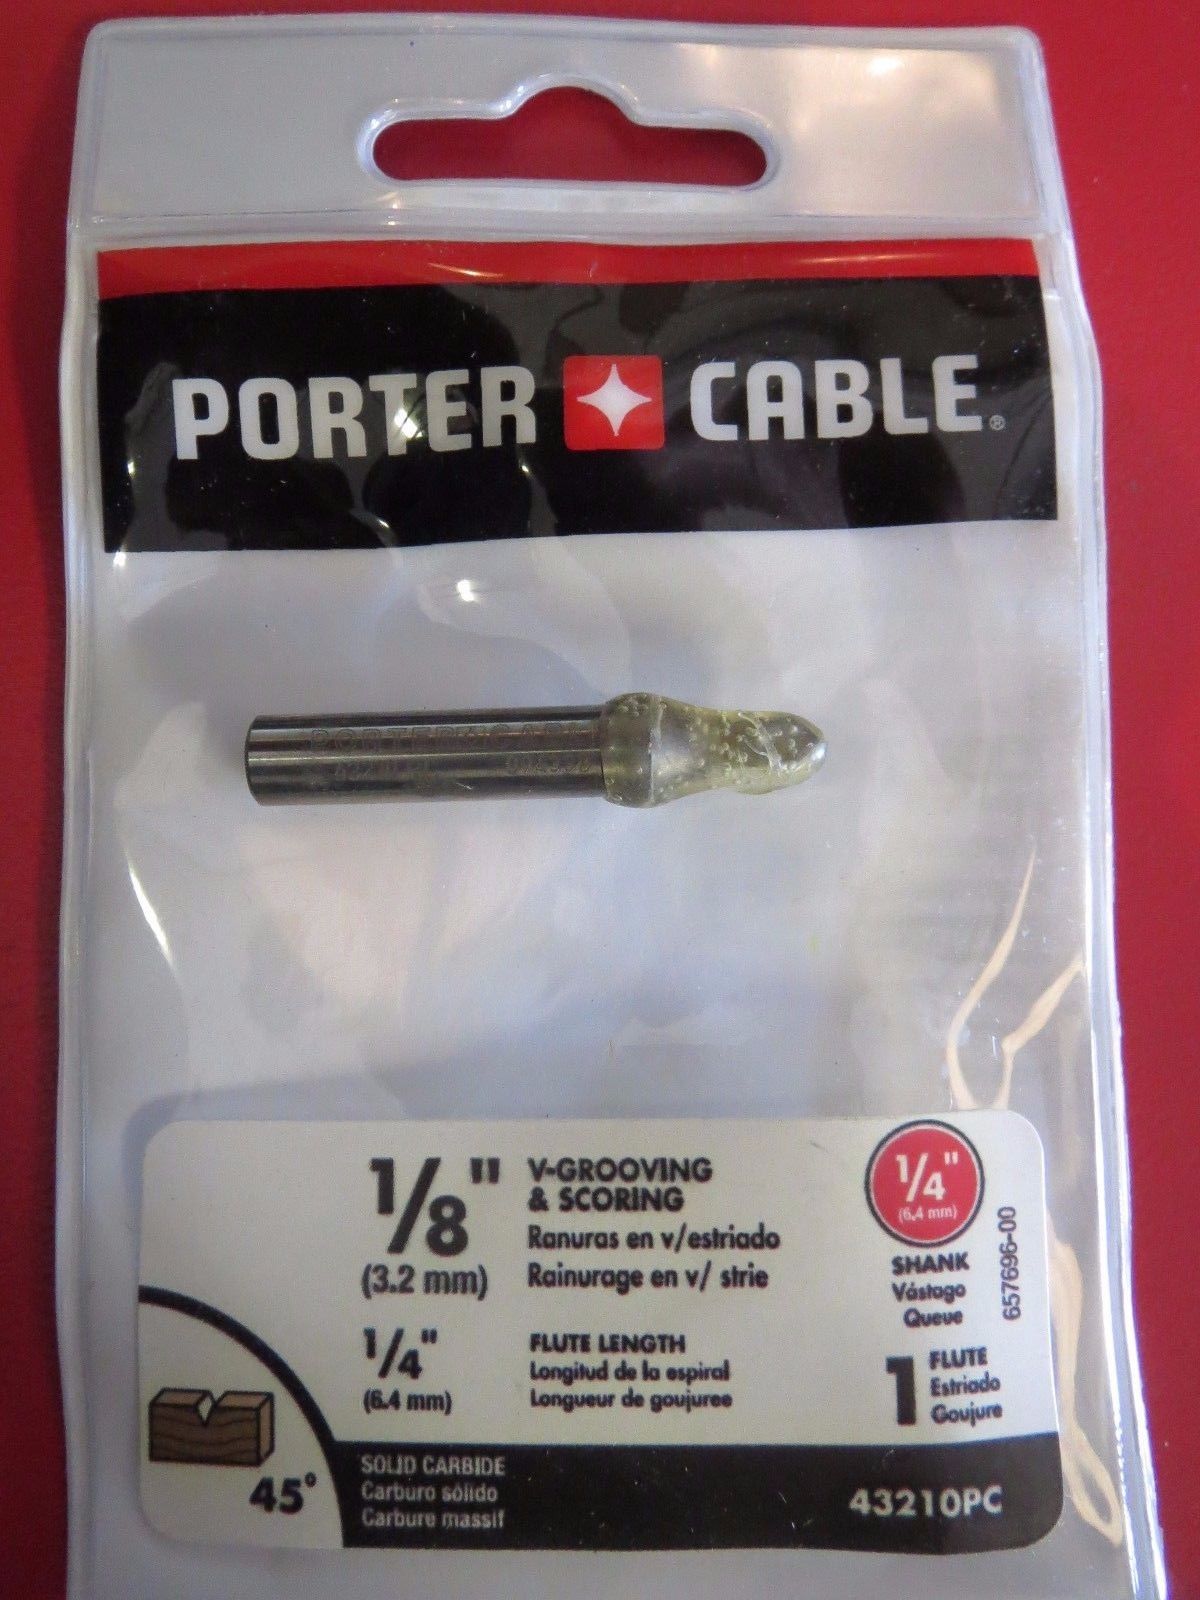 Porter Cable 43210PC V-Groove & Scoring